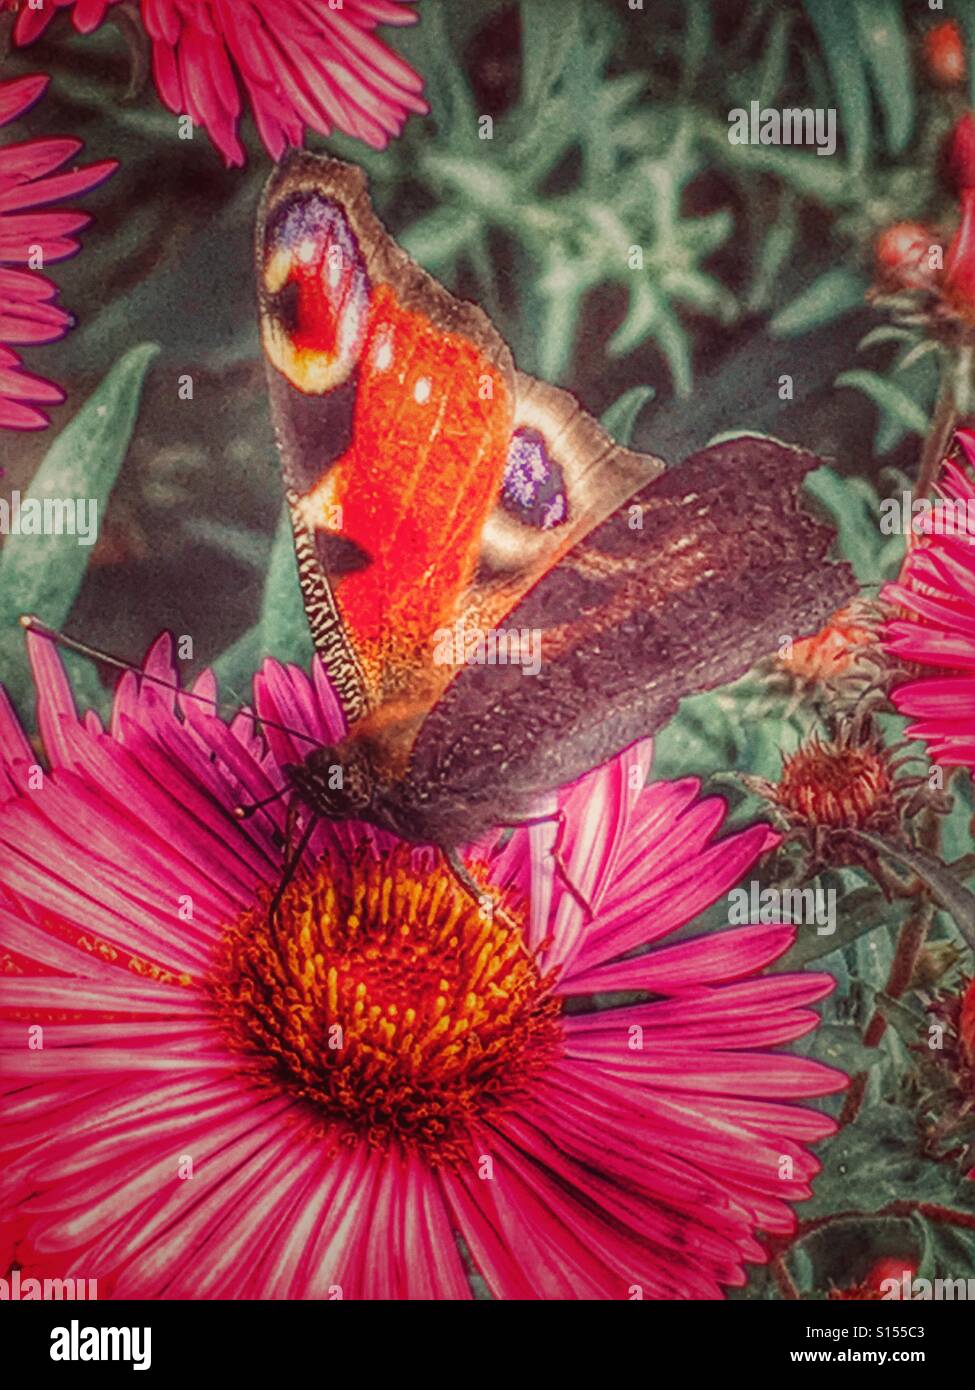 The European Peacock butterfly on a flower, showing both sides of its wings, one side dull and the other colourful. Stock Photo